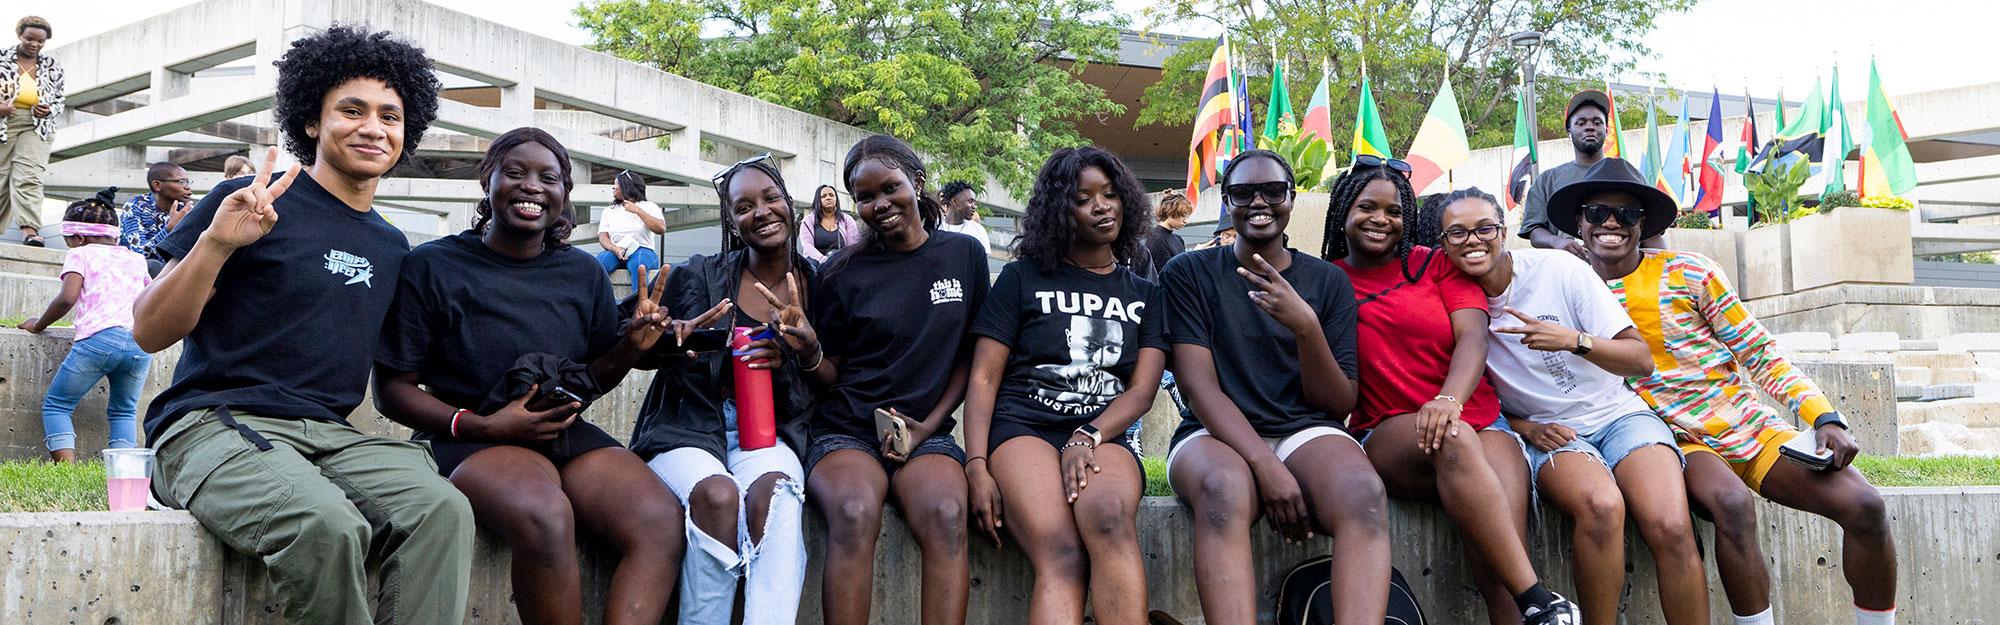 A group of ten black UVU students posing together on campus